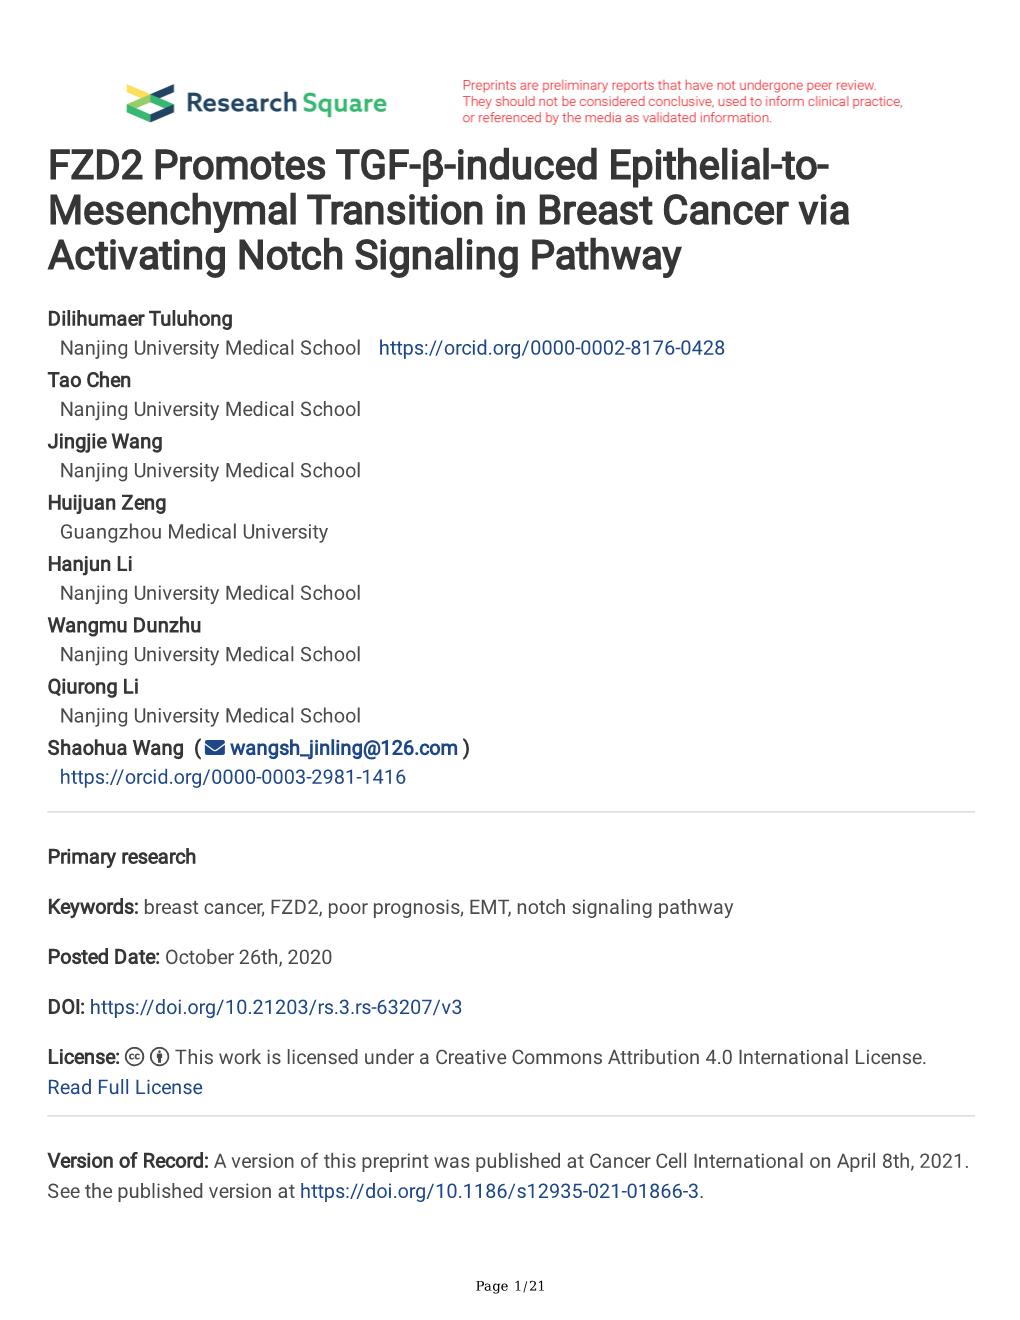 FZD2 Promotes TGF-Β-Induced Epithelial-To- Mesenchymal Transition in Breast Cancer Via Activating Notch Signaling Pathway